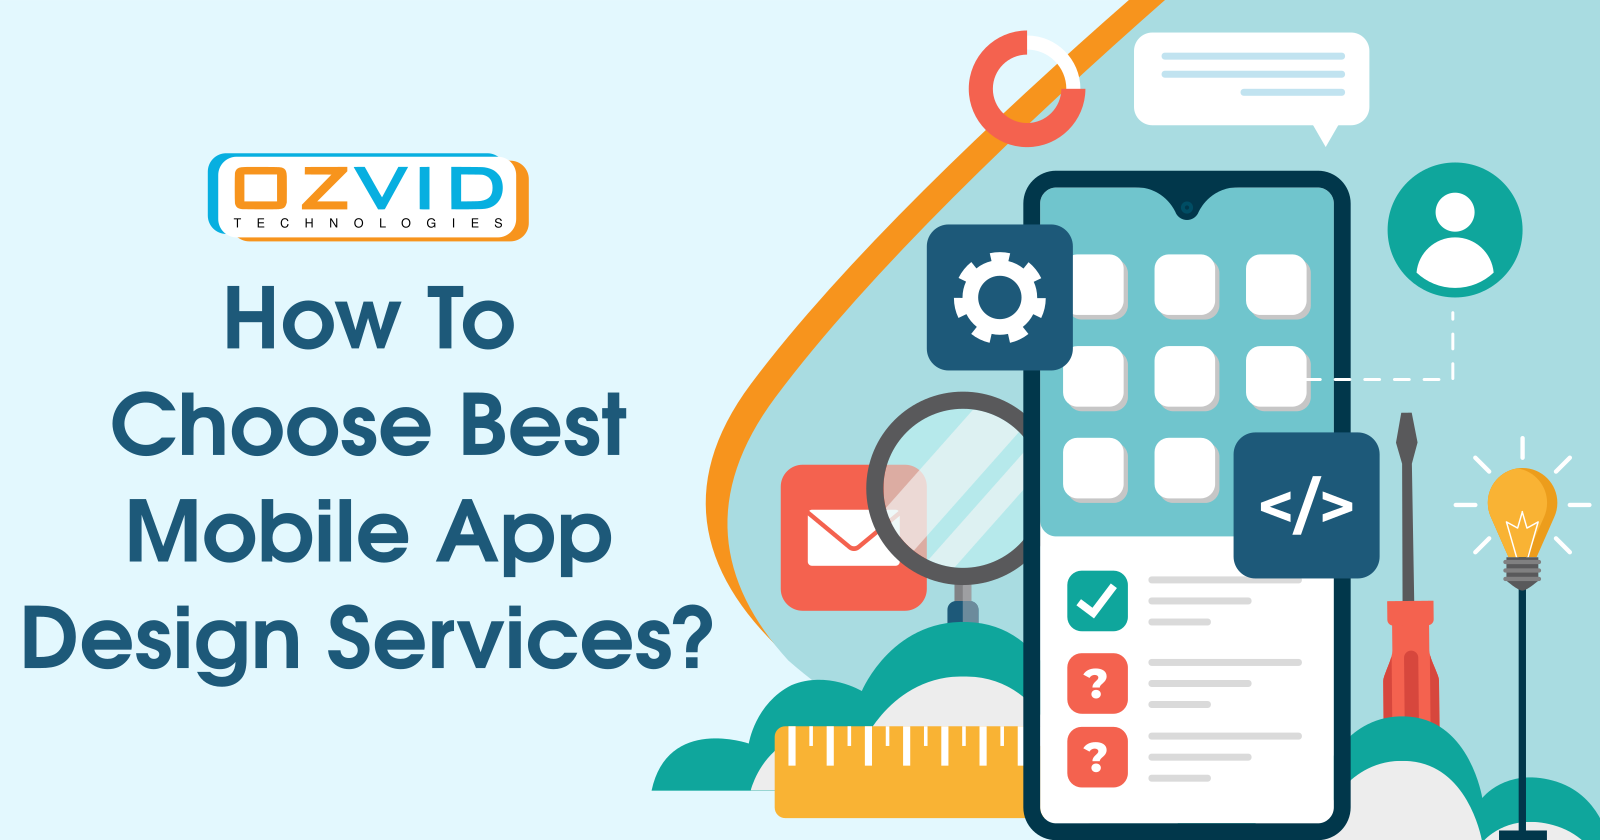 How To Choose Best Mobile App Design Services?